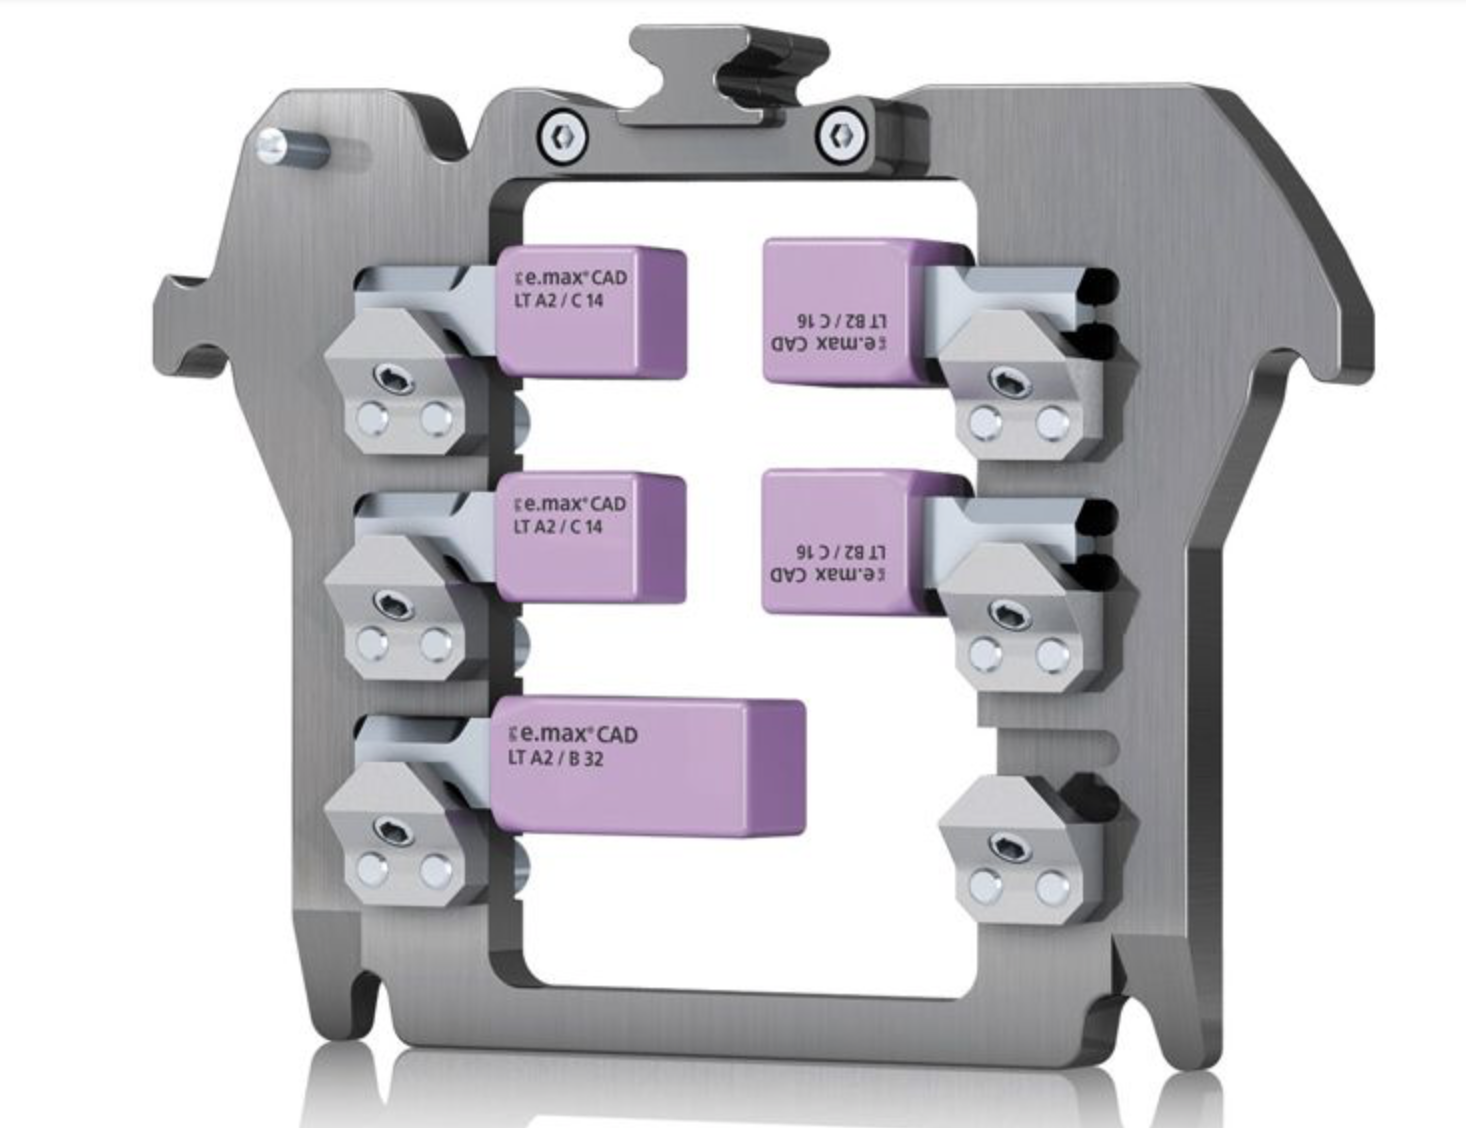 The mill designed exclusively for IPS e.max CAD